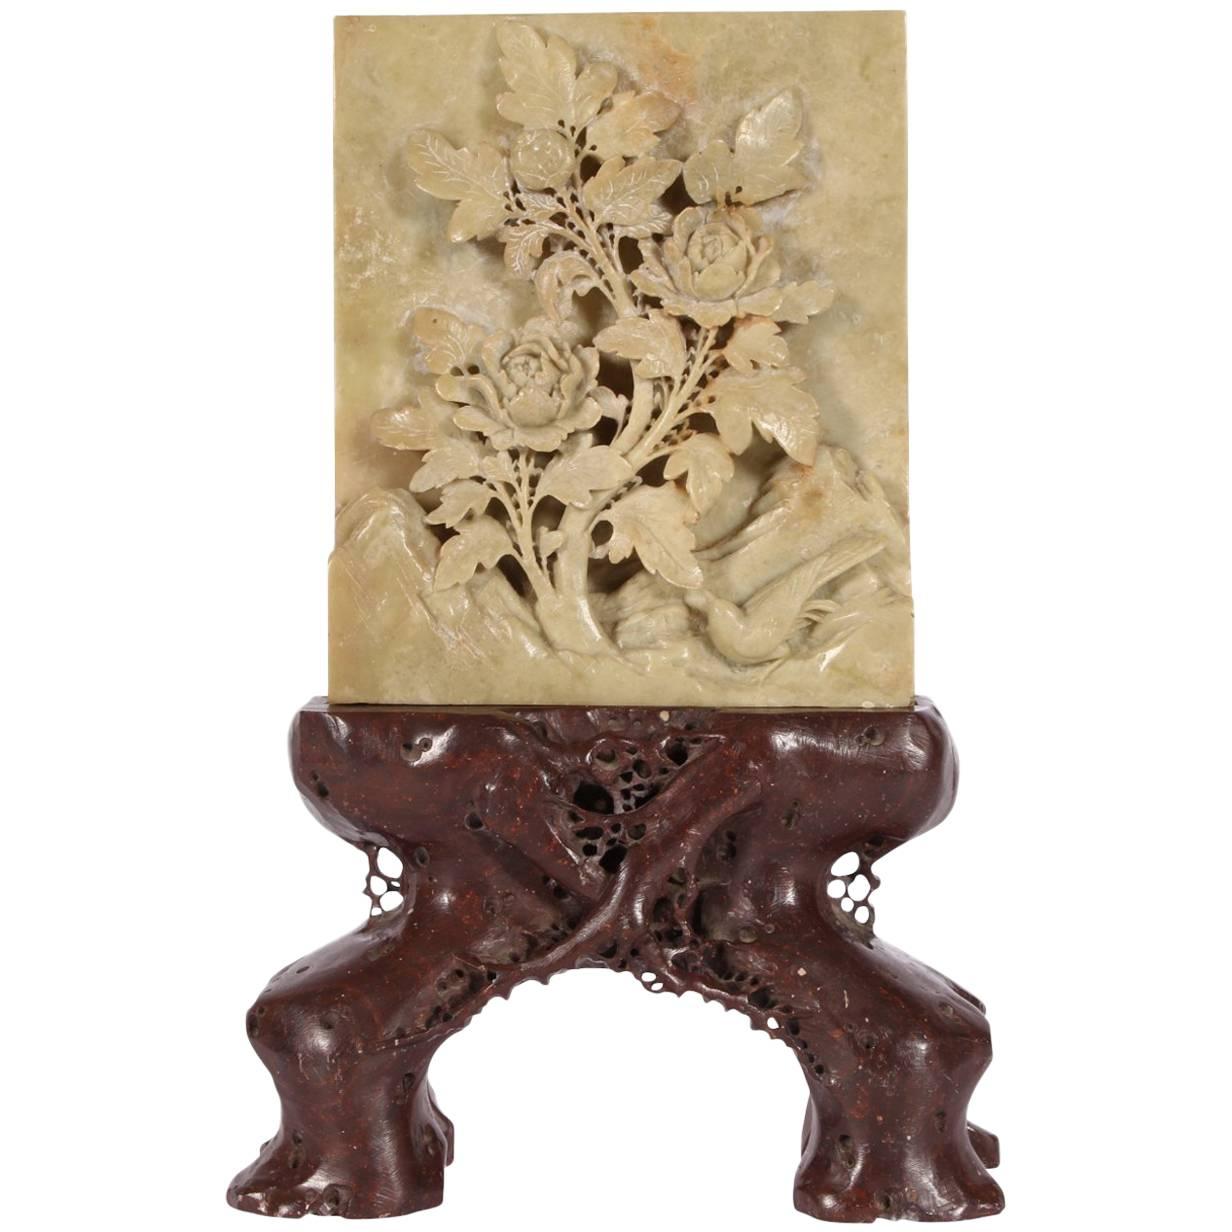 Scholar's Object Stone Plaque on Root Form Stand